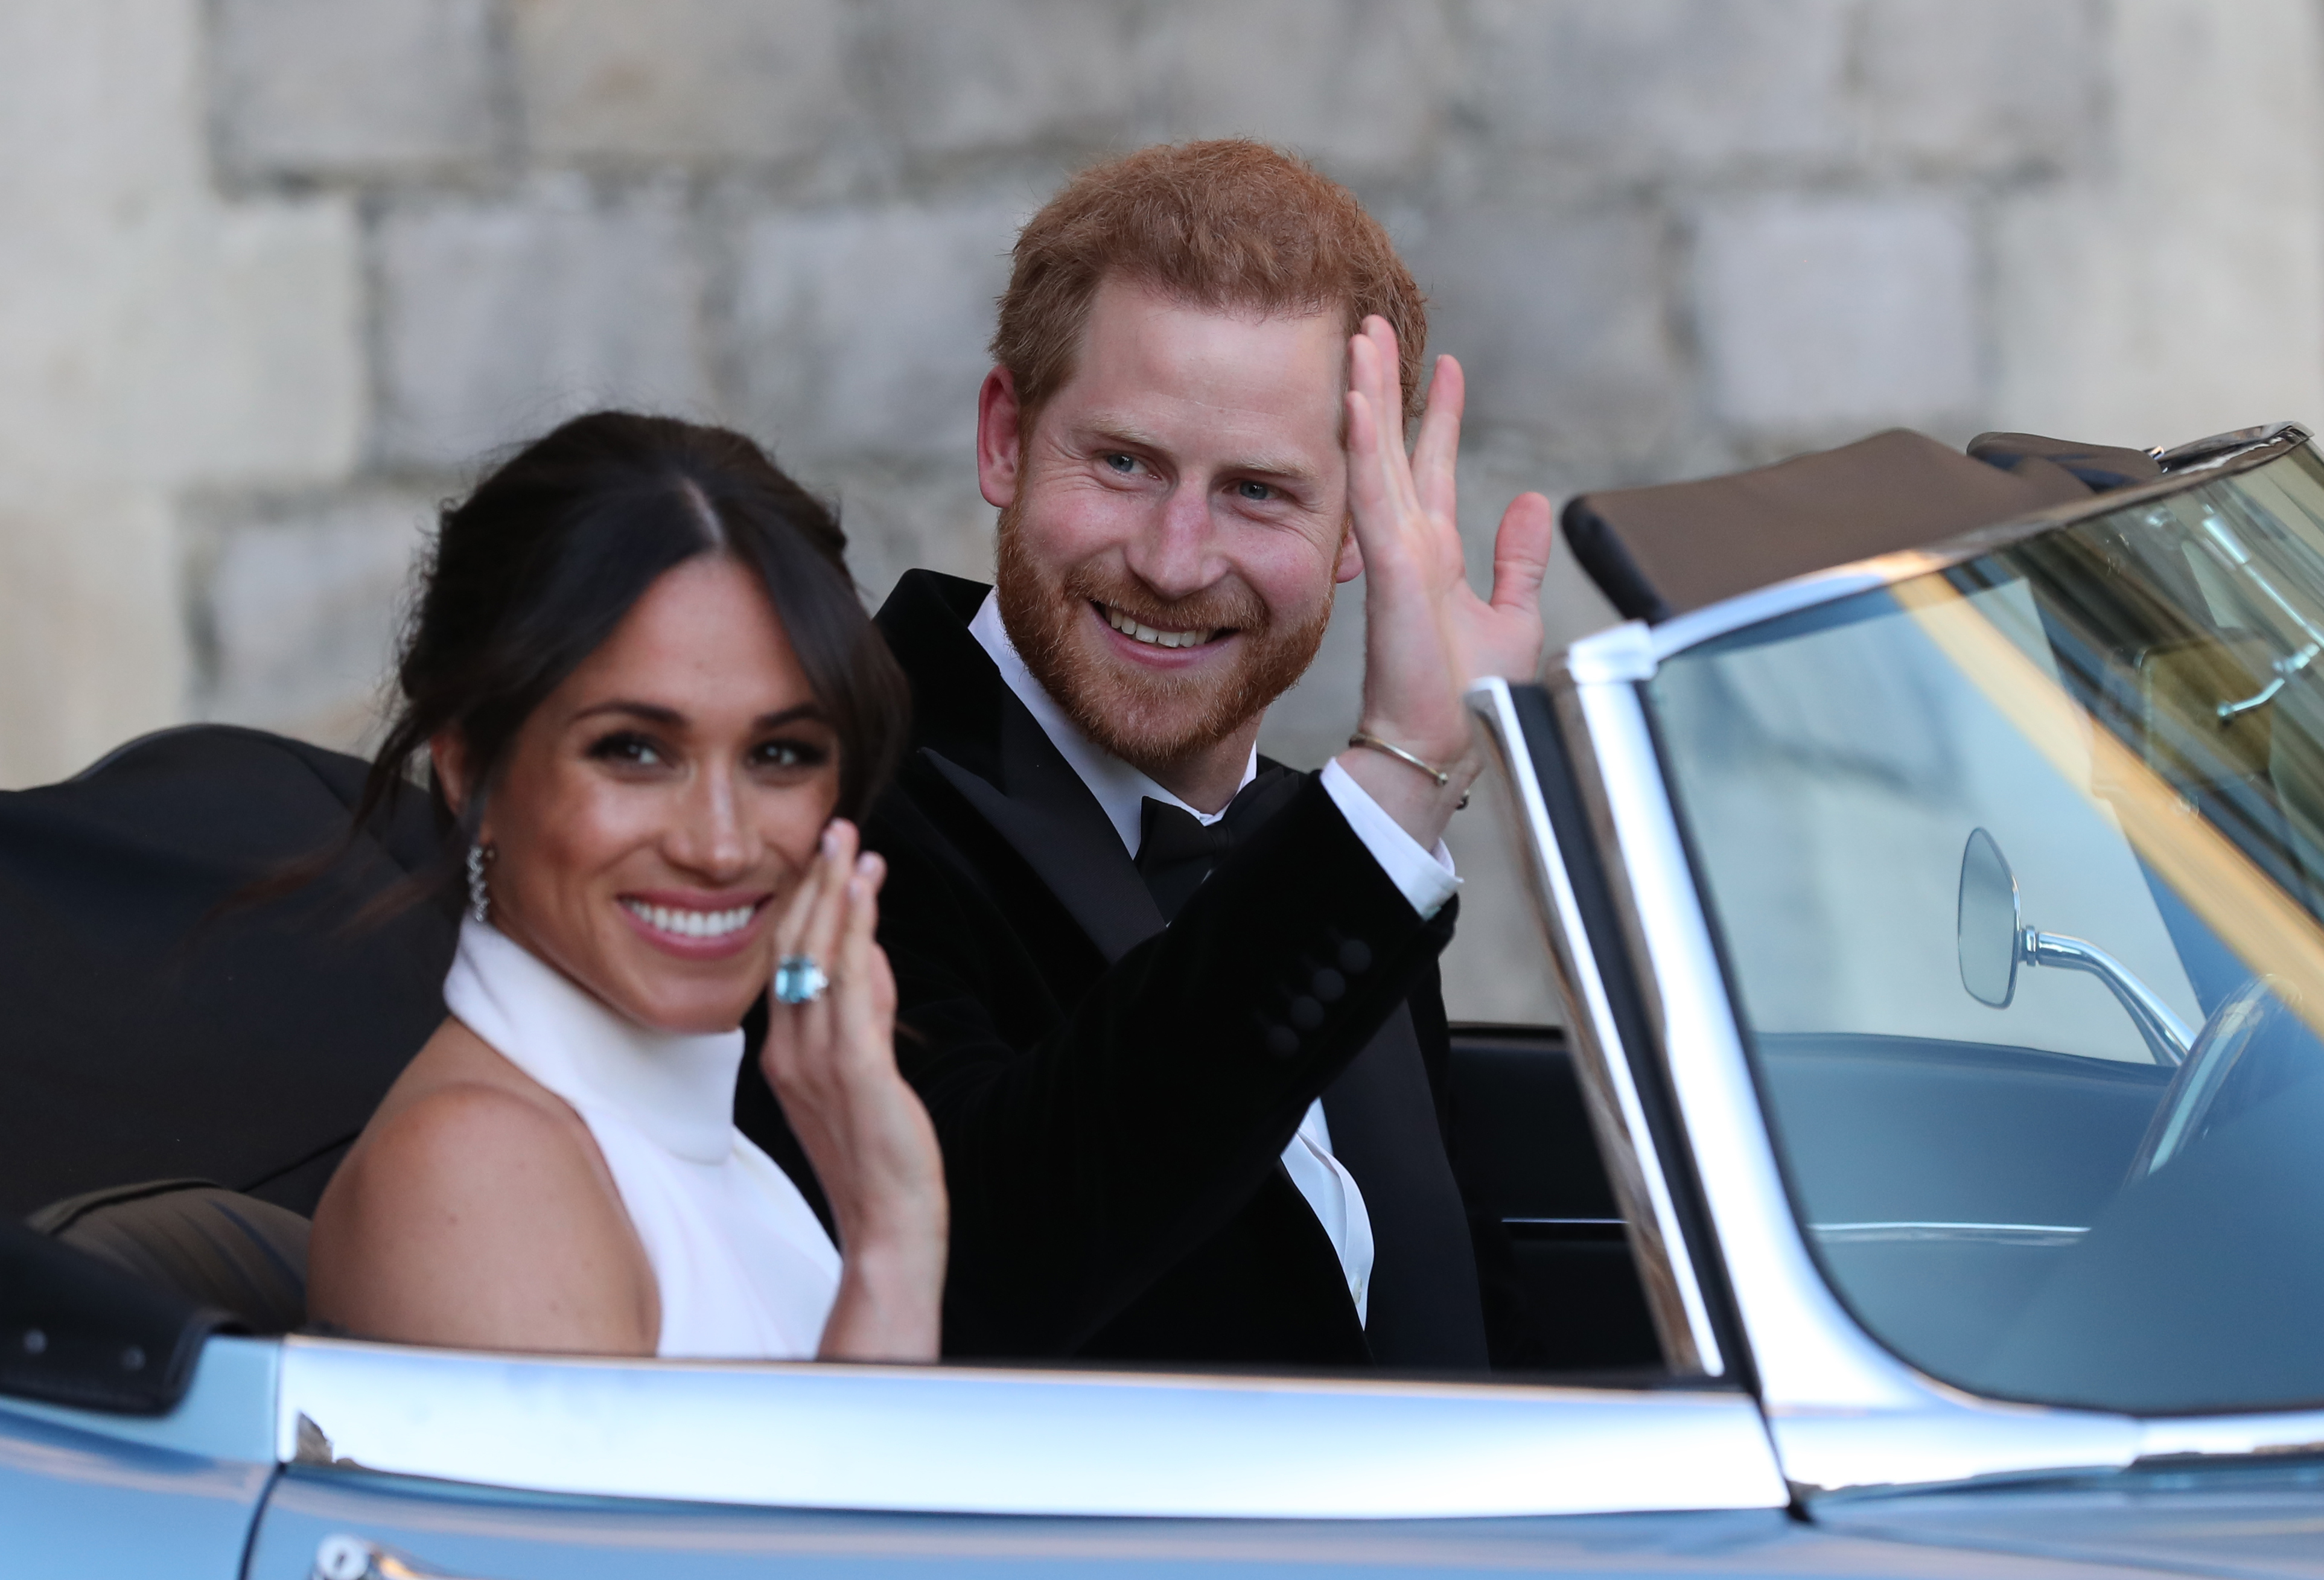 Prince Harry and Meghan Markle wave as they leave Windsor Castle, in Windsor, England, on May 19, 2018. | Source: Getty Images